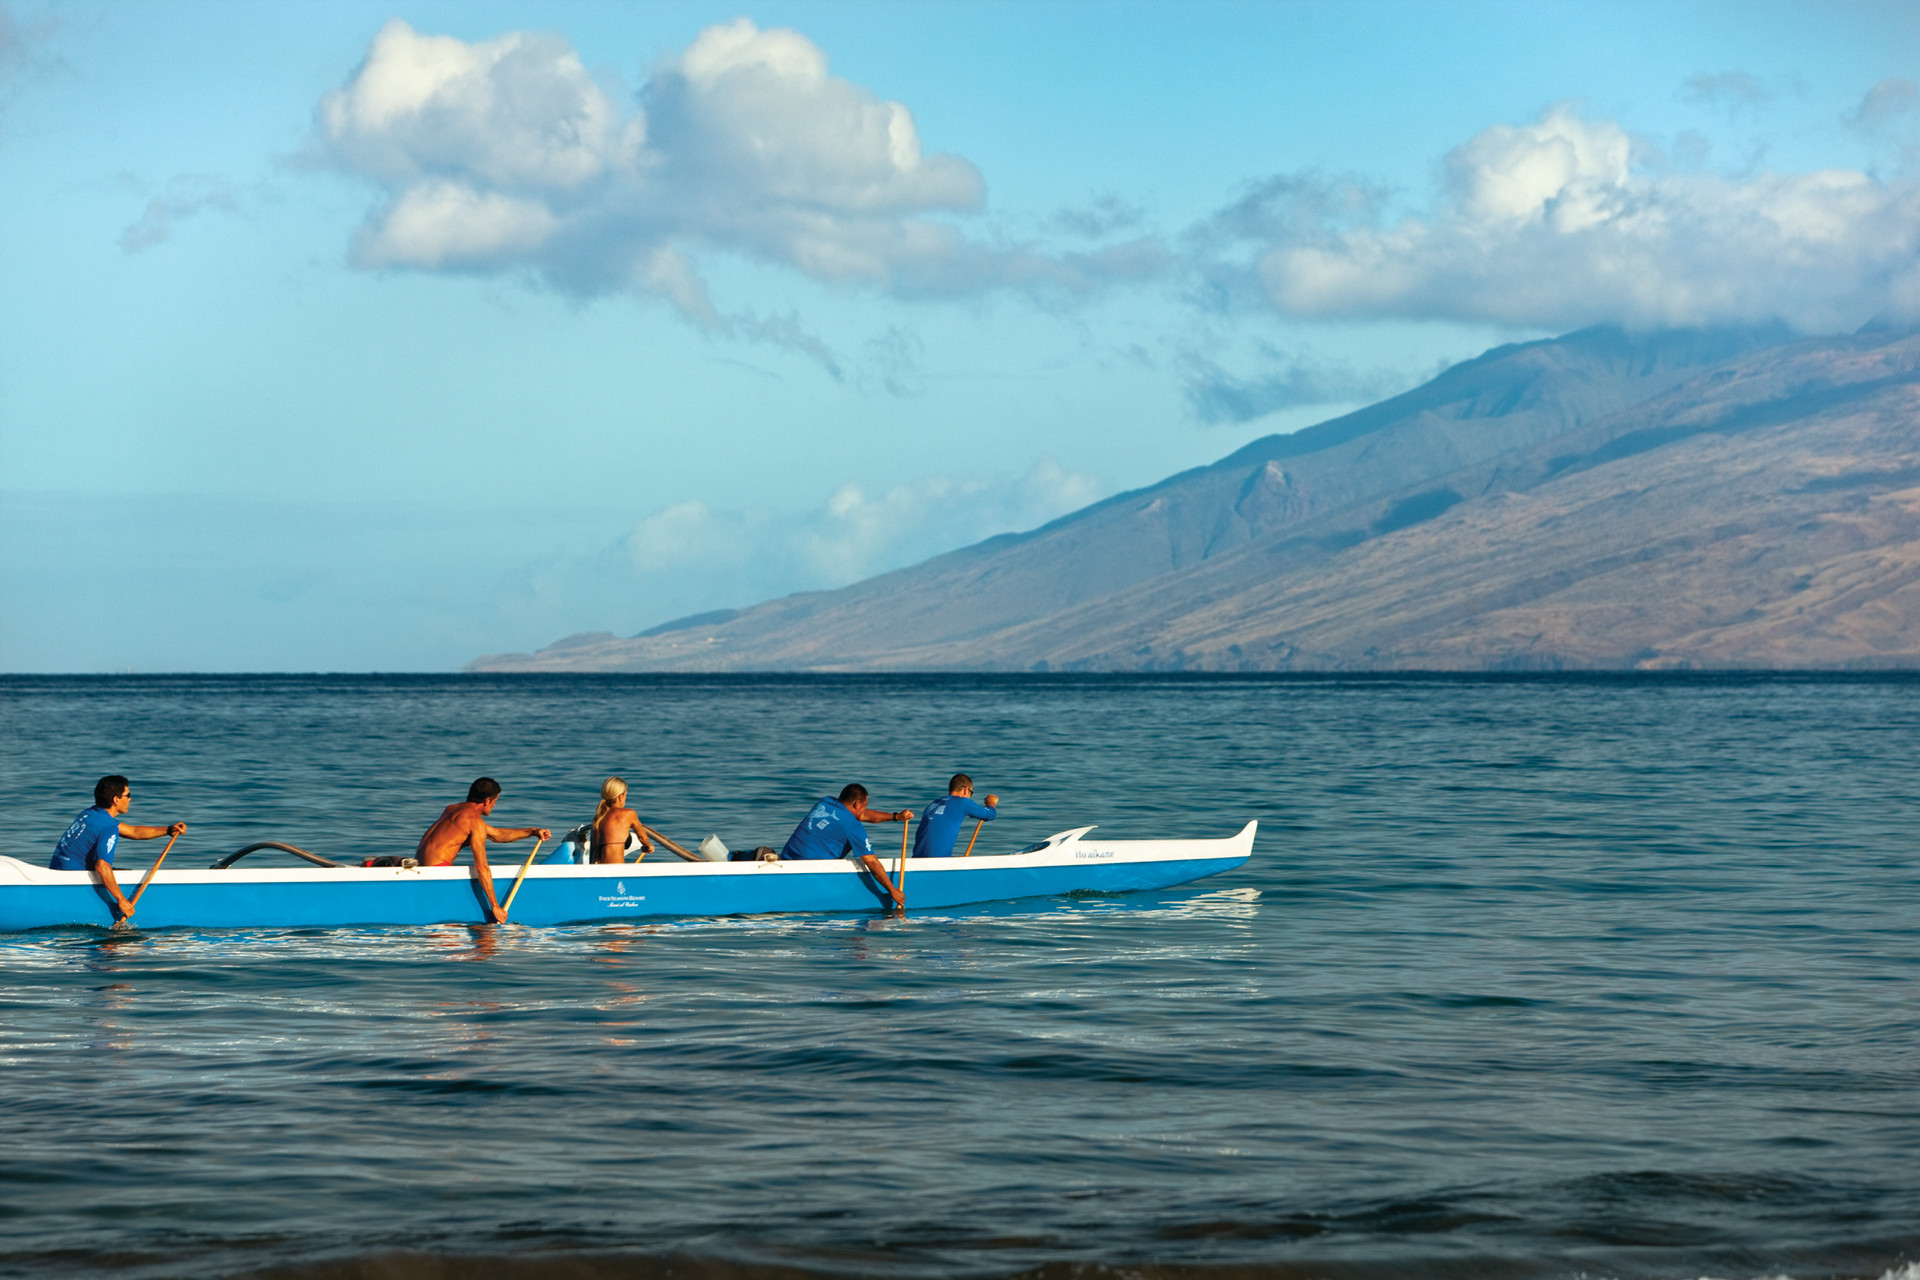 Four Seasons Resort Maui guests learn the history and the how-to of this Hawaiian paddling sport while keeping eyes and cameras peeled for whale sightings and point out the abundance of sea life.